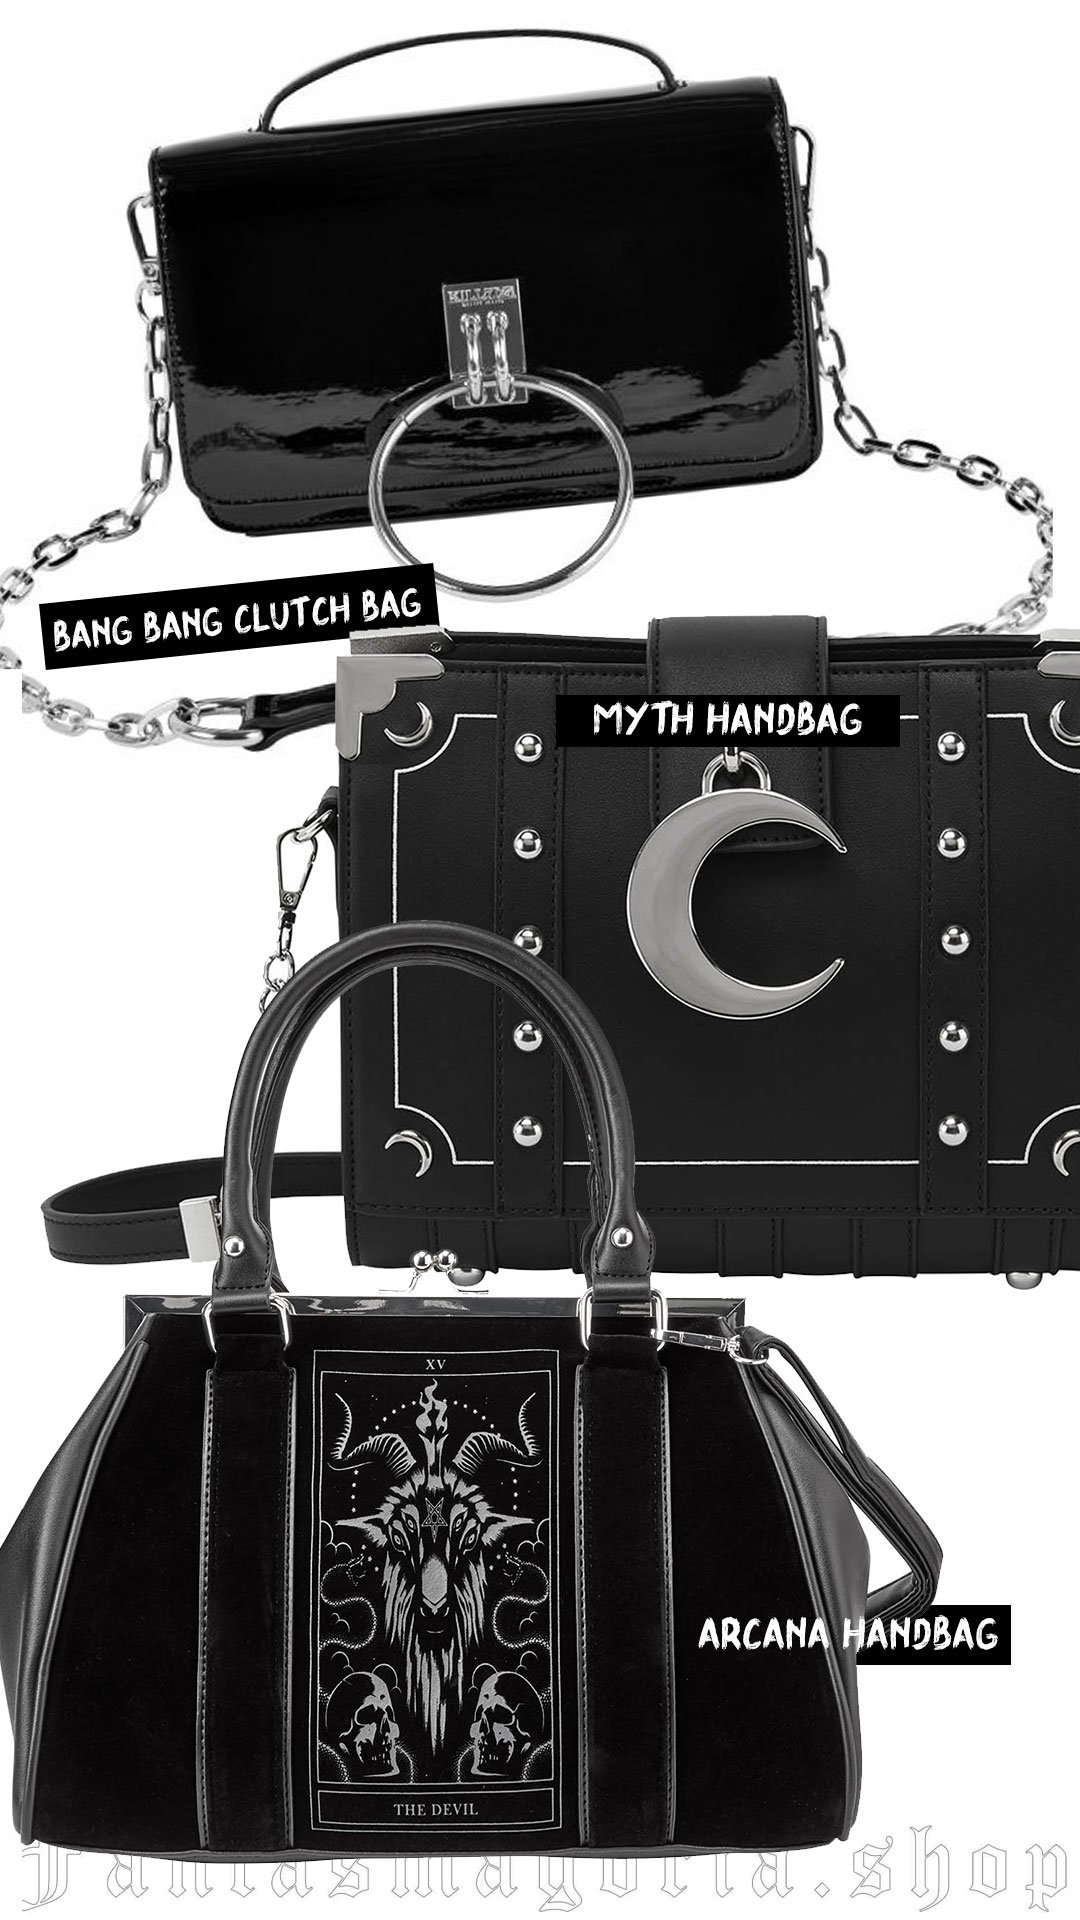 goth handbags clutch bags with the moon and chains